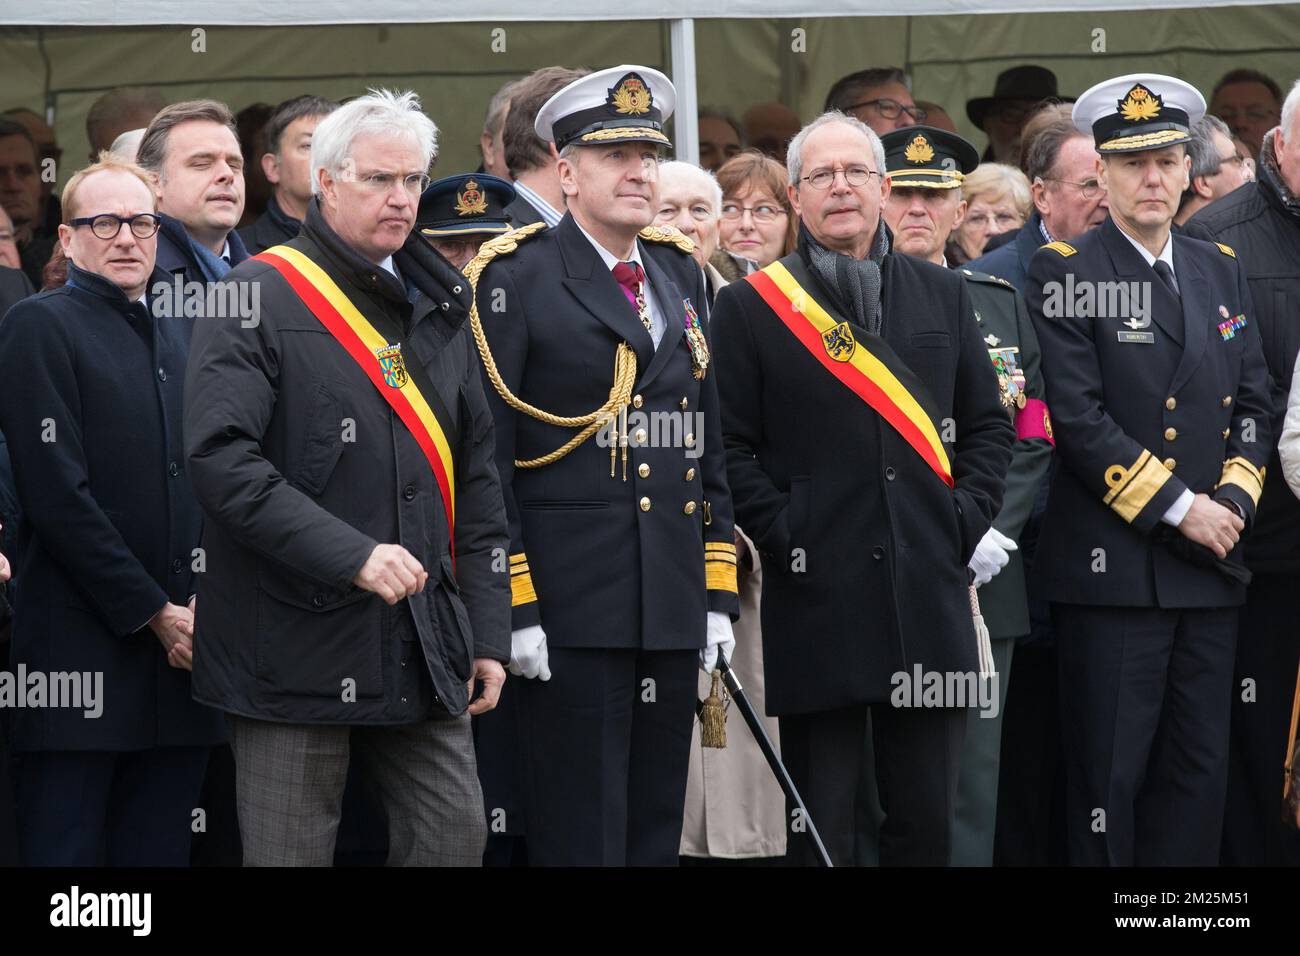 West-Flanders province governor Carl Decaluwe, Rear Admiral Michel Hofman, Brugge's Mayor Renaat Landuyt and Navy Commander Wim Robberecht pictured during a tribute ceremony for the 30th anniversary of the Herald of Free Enterprise ferry disaster, on Monday 06 March 2017 in Zeebrugge. On 6 March 1987 the ferry left the harbor of Zeebrugge, bound for Dover with more than 450 passengers and 80 crew members on board. It capsized just outside the harbor. The disaster, which was caused by the failure to close the bow doors, cost the life of 194 people. BELGA PHOTO KURT DESPLENTER Stock Photo